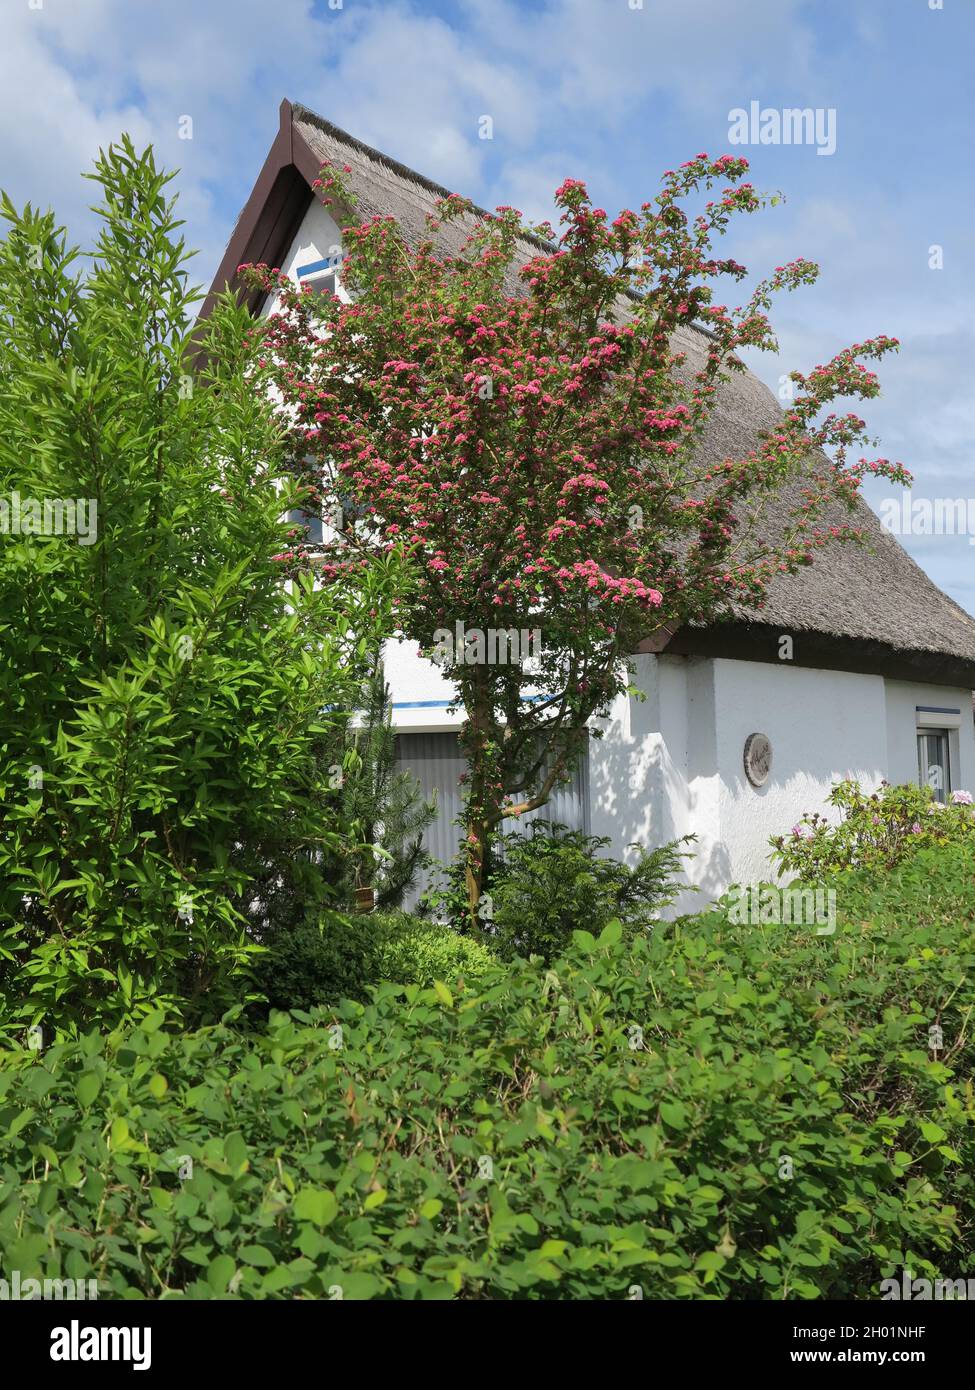 Small white house with thatched roof hidden behind trees and hedge Stock Photo